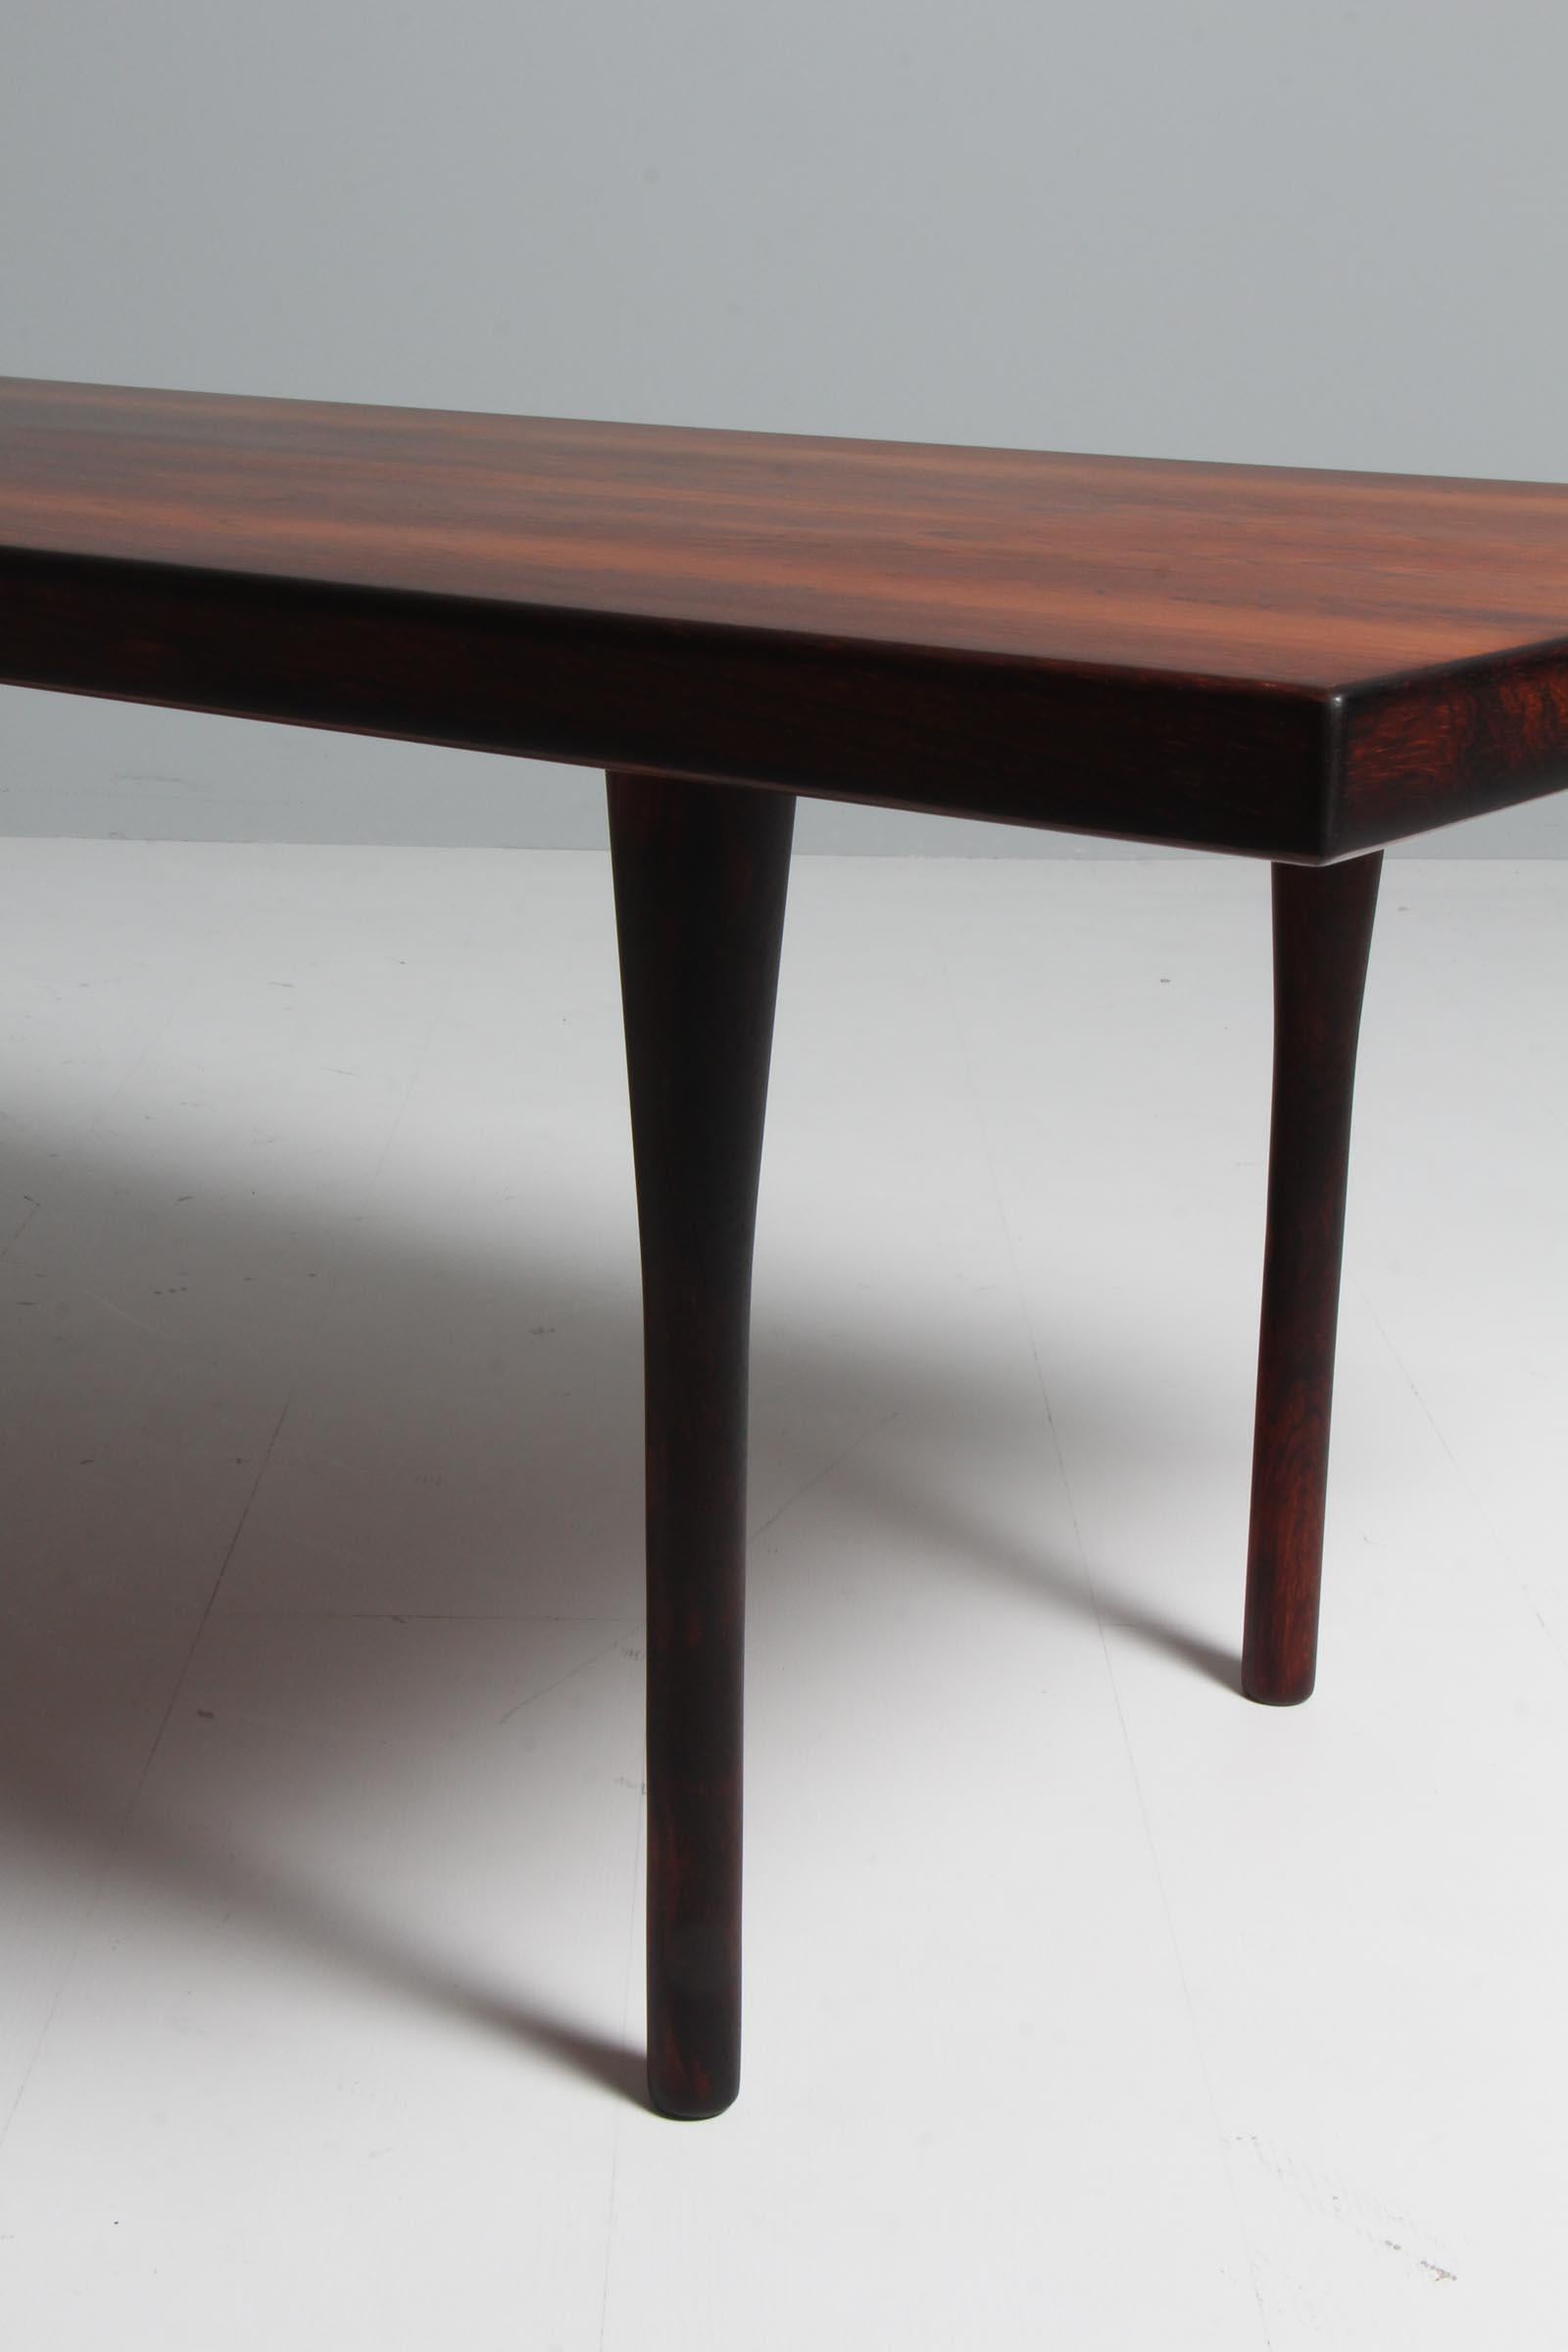 Illum Wikkelsø Coffee Table in Rosewood In Excellent Condition For Sale In Esbjerg, DK